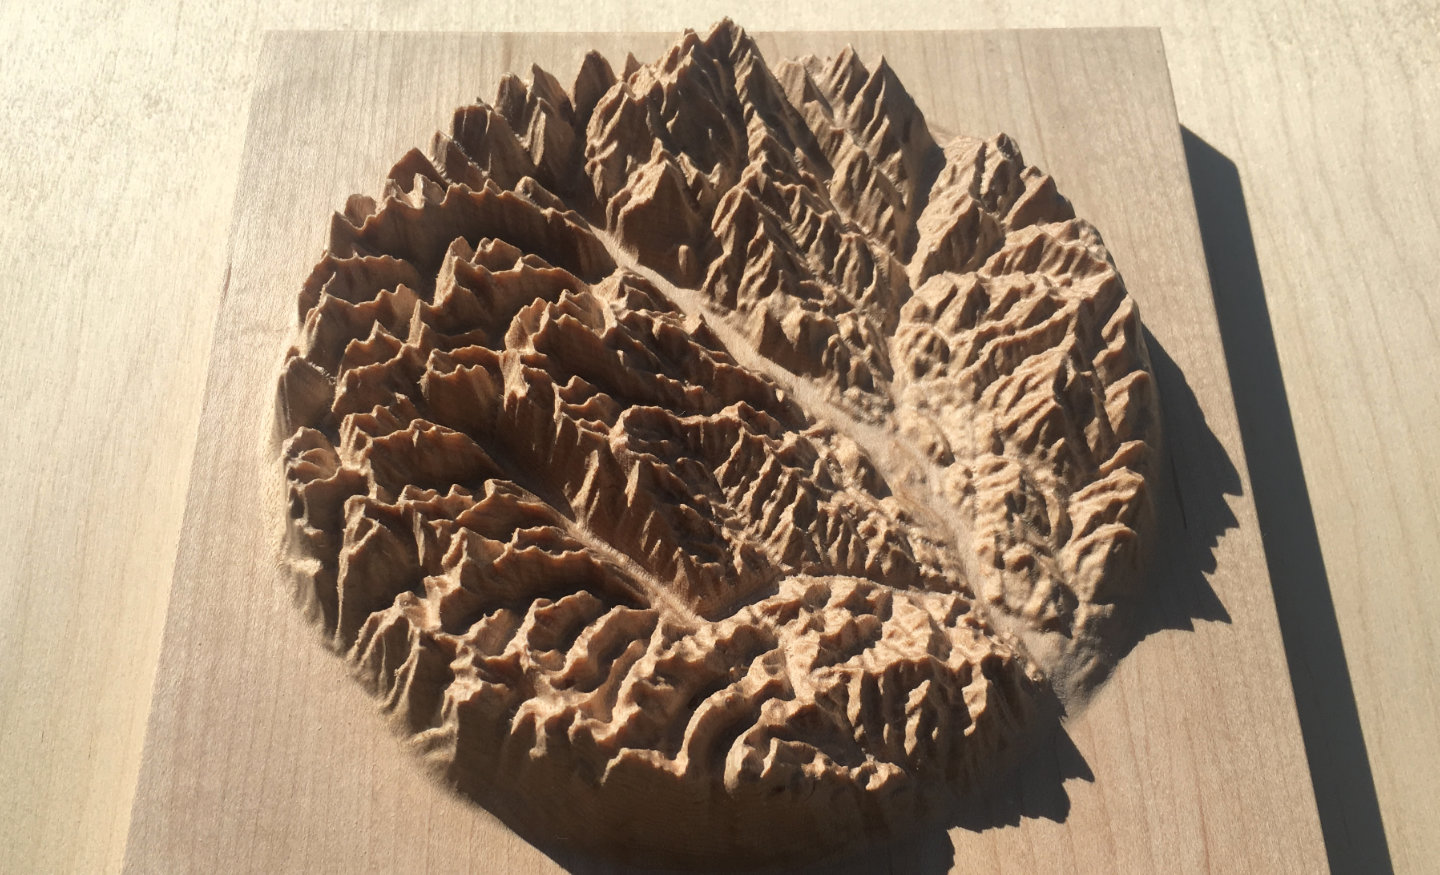 three-dimensional wood-carved relief map of the mountains of the Methow Valley in the North Cascades, Washington, United States